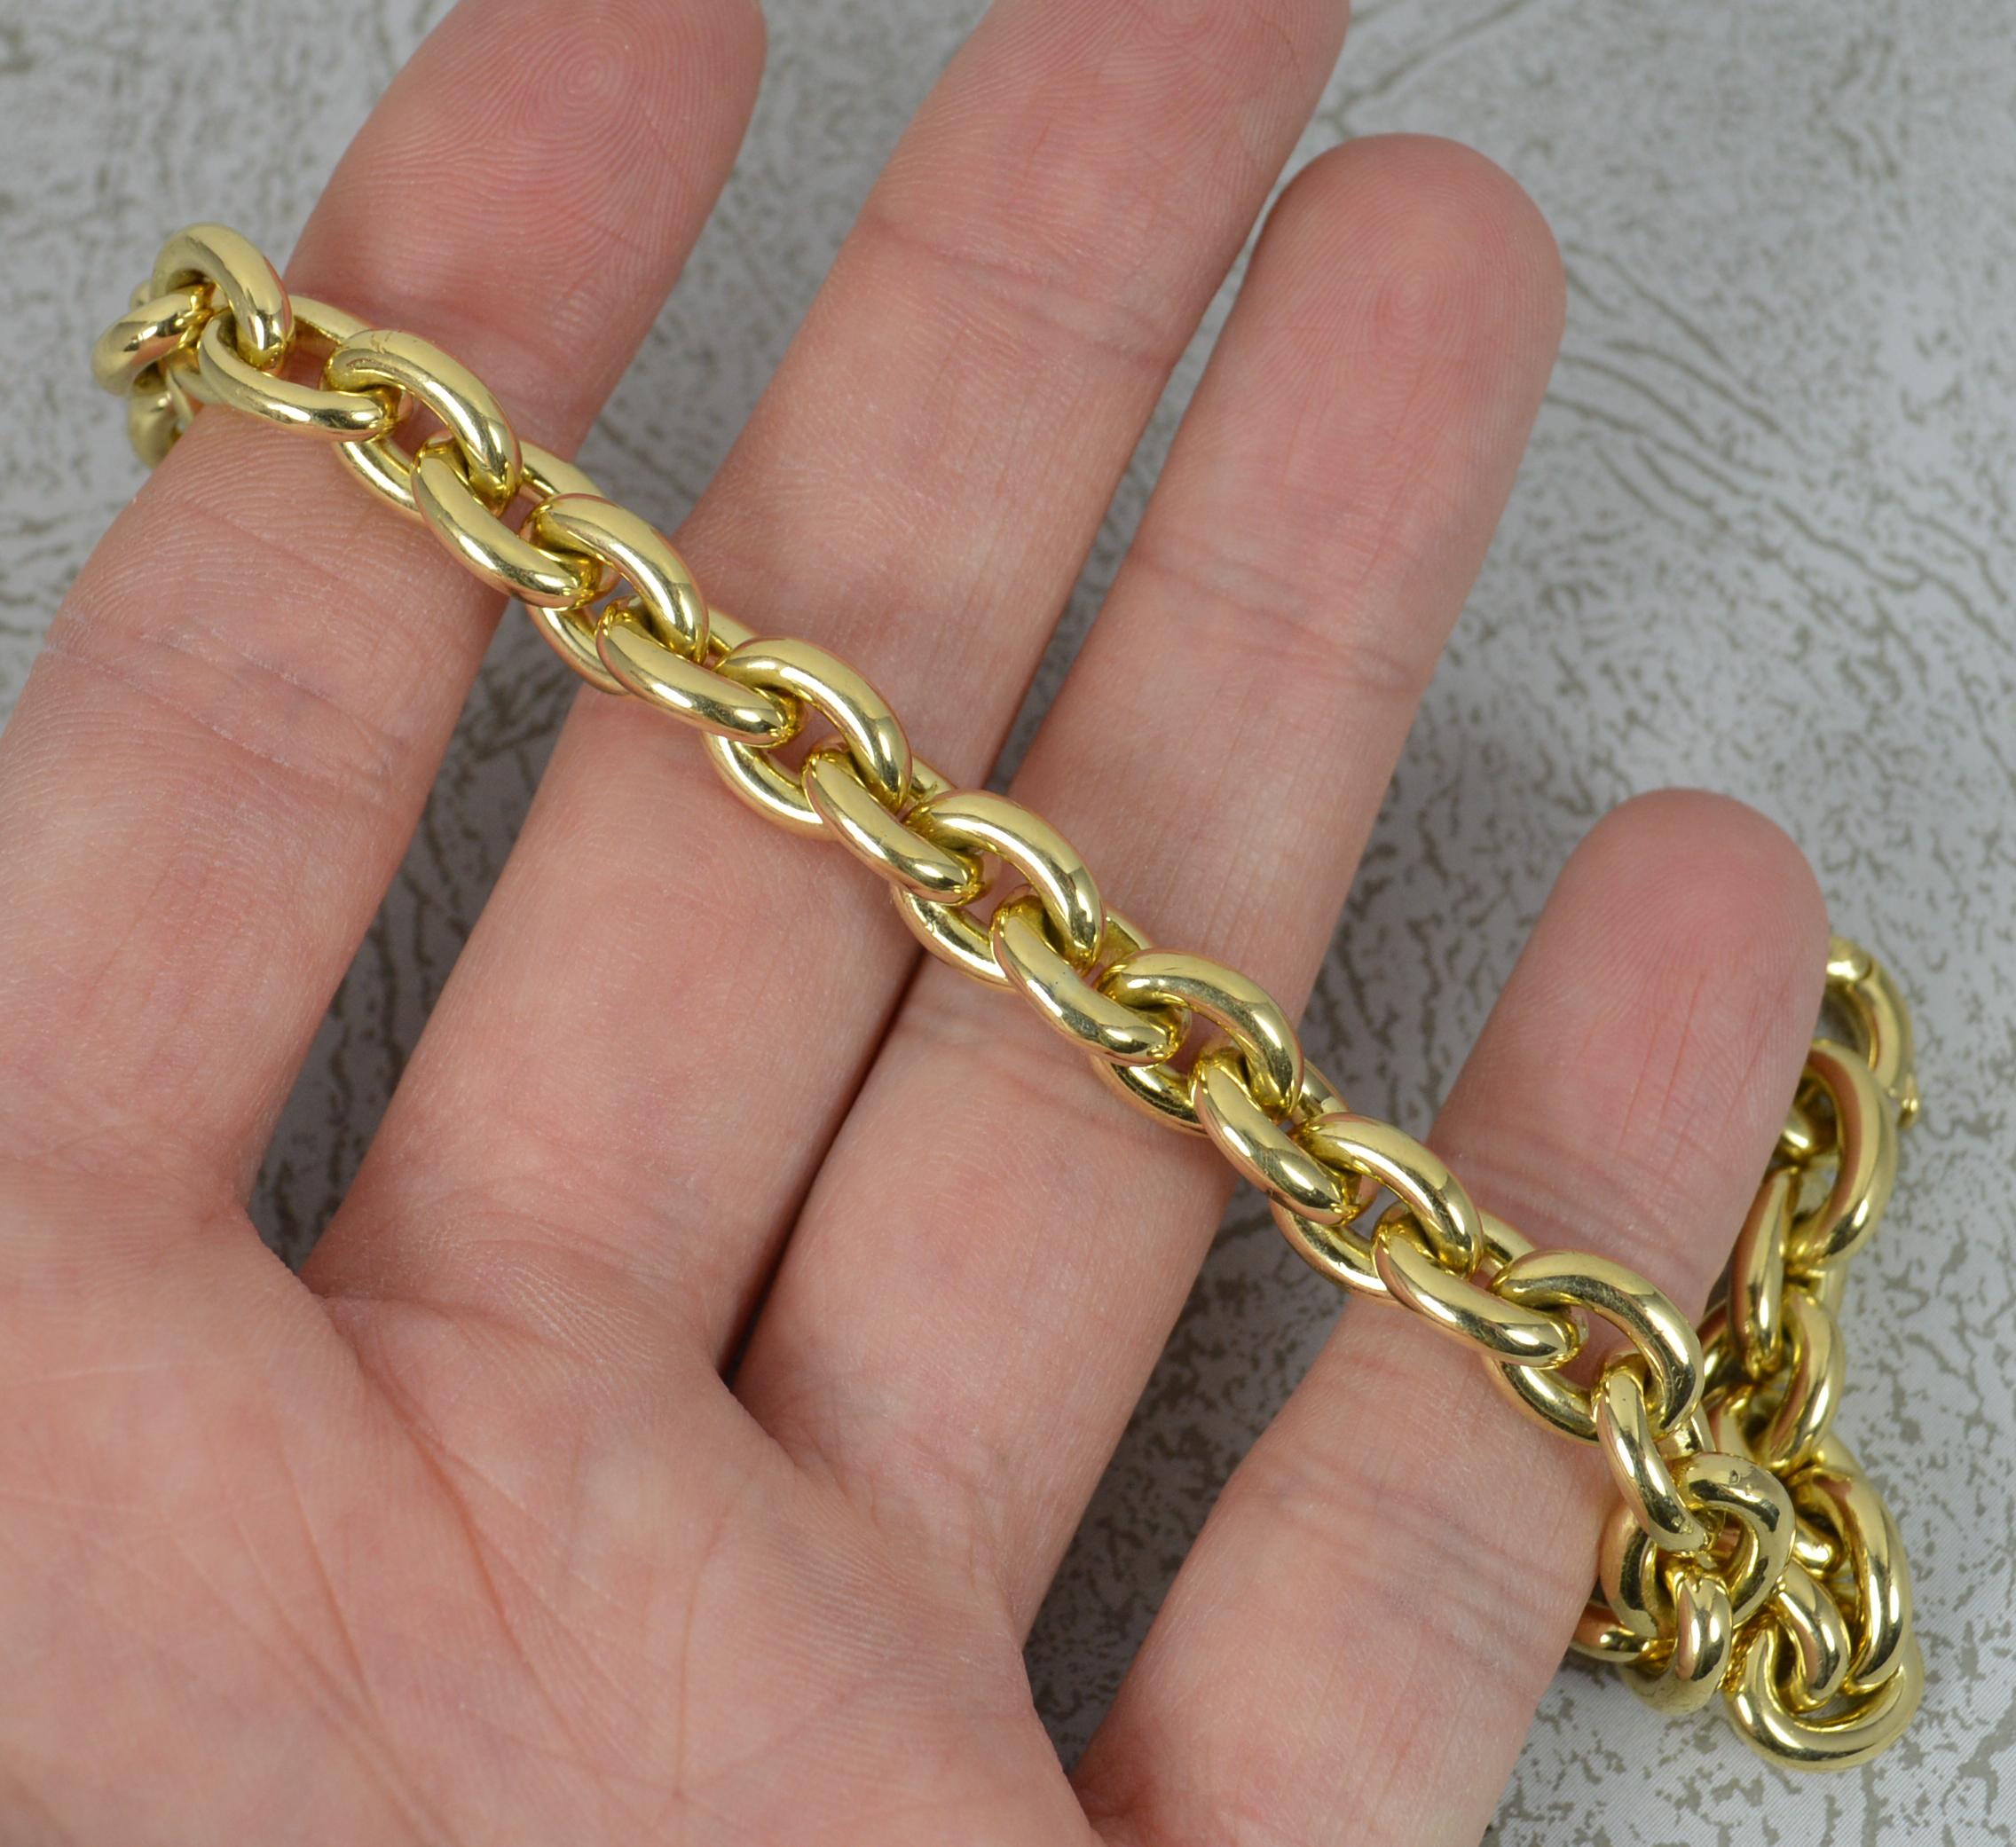 A stunning Pomellato designer bracelet.
Solid and chunky 18 carat yellow gold example.
Designed and made by Pomellato.

CONDITION ; Excellent. Very clean. Working clasp. Solid links. Please view photographs.
WEIGHT ; 54.7 grams
SIZE ; 6 3/4 inches,